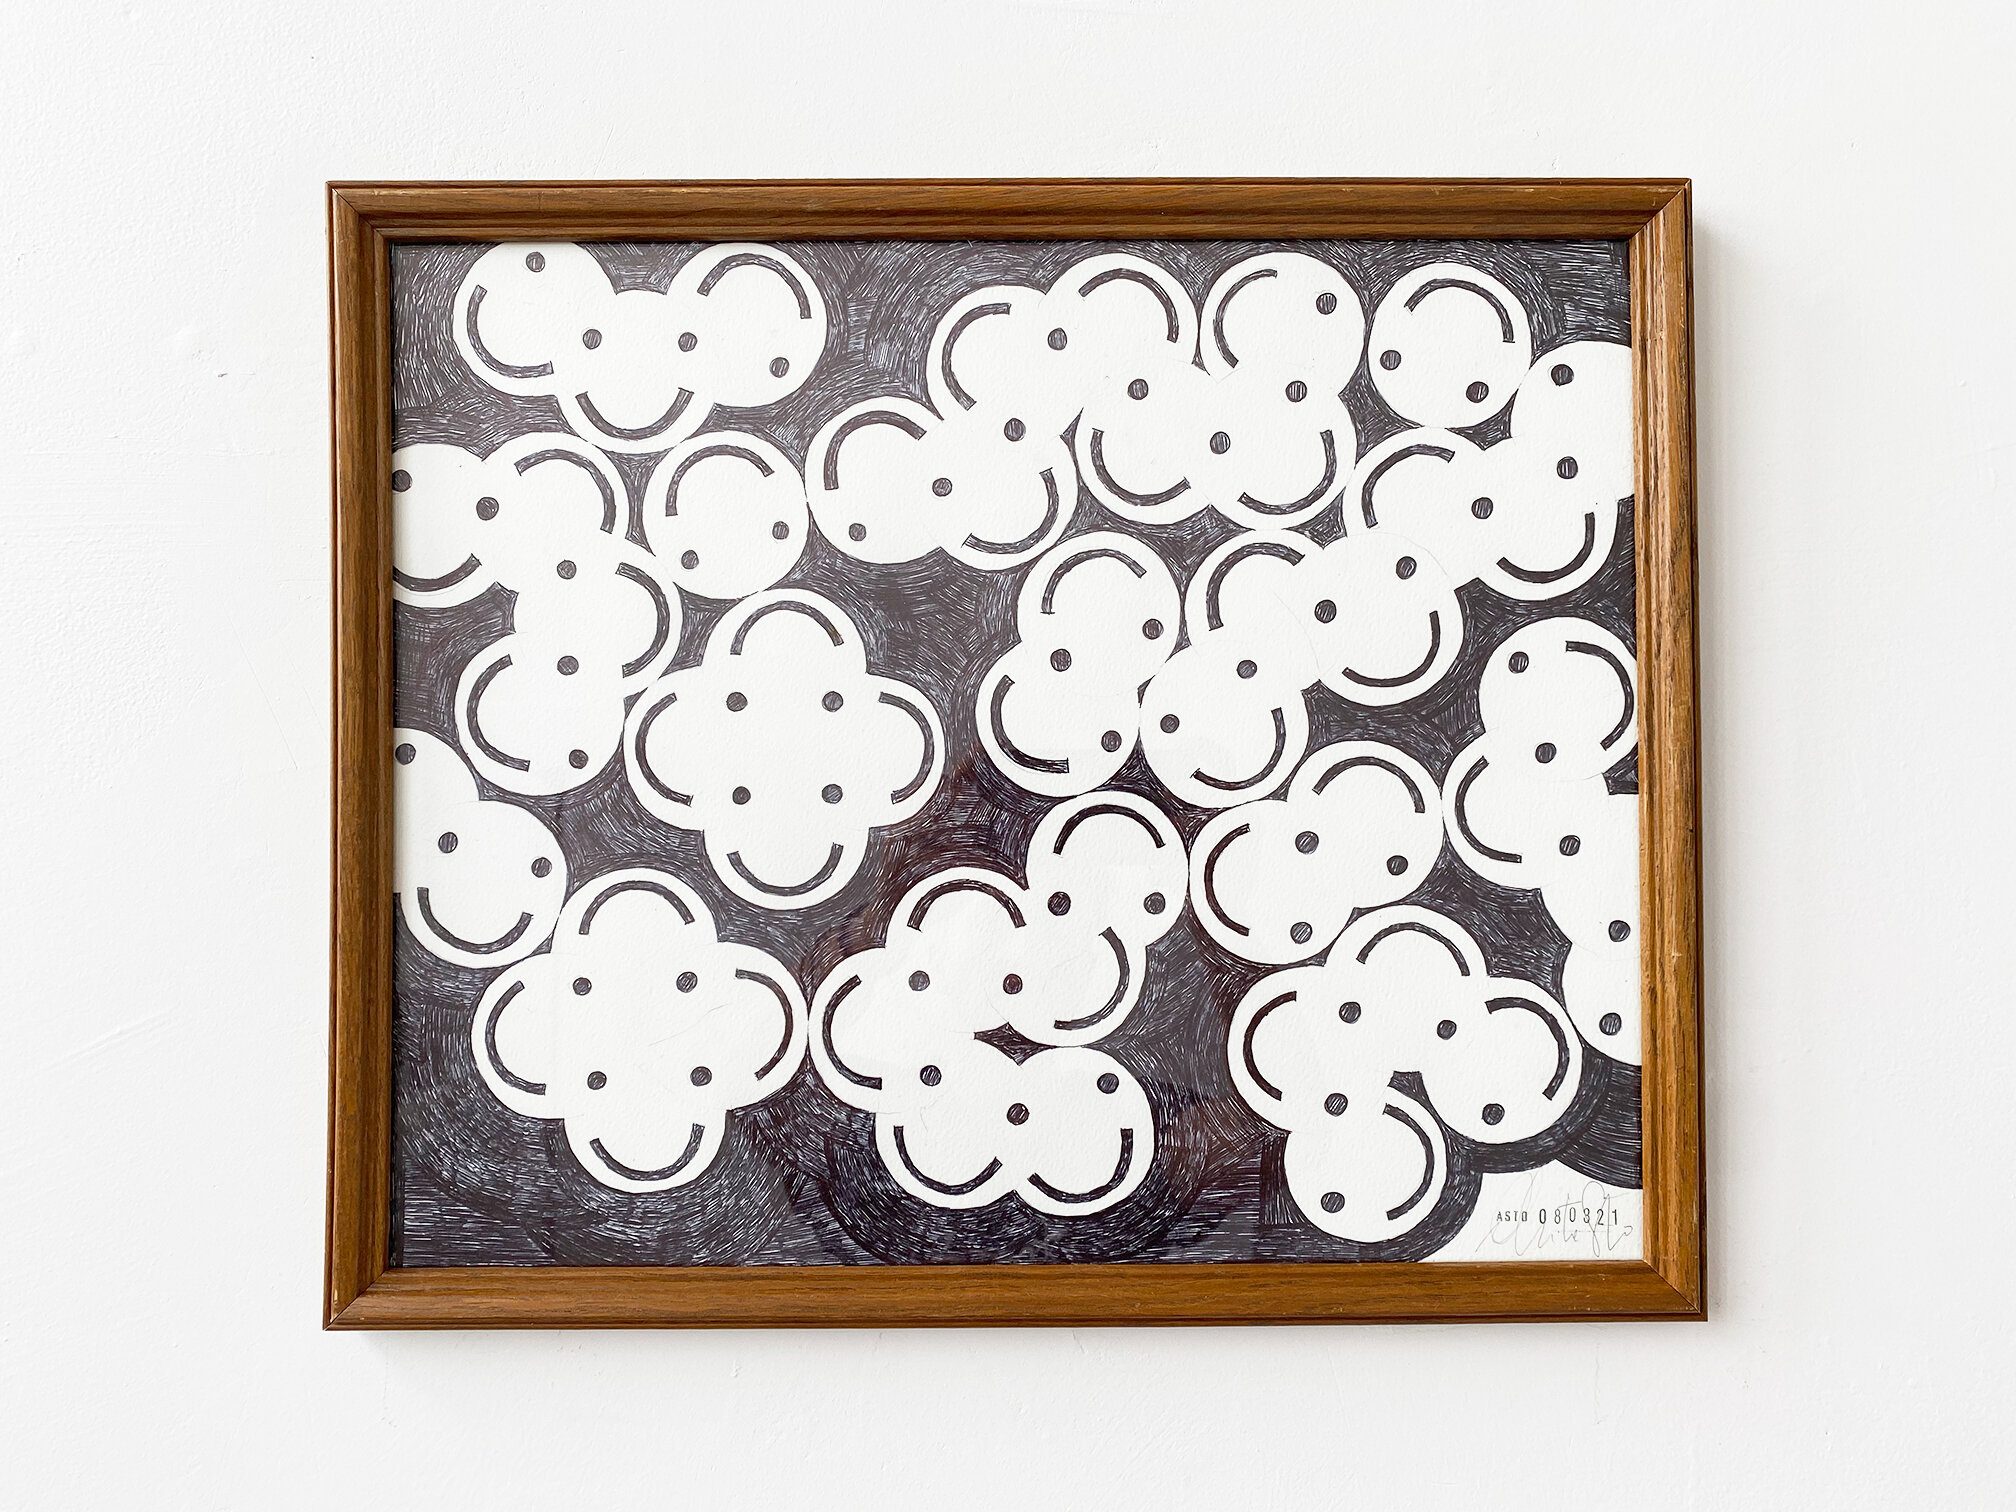   SMILING FACES 12  Ink on Arches Paper Wood frame and Glass 14” x 18” 2021 